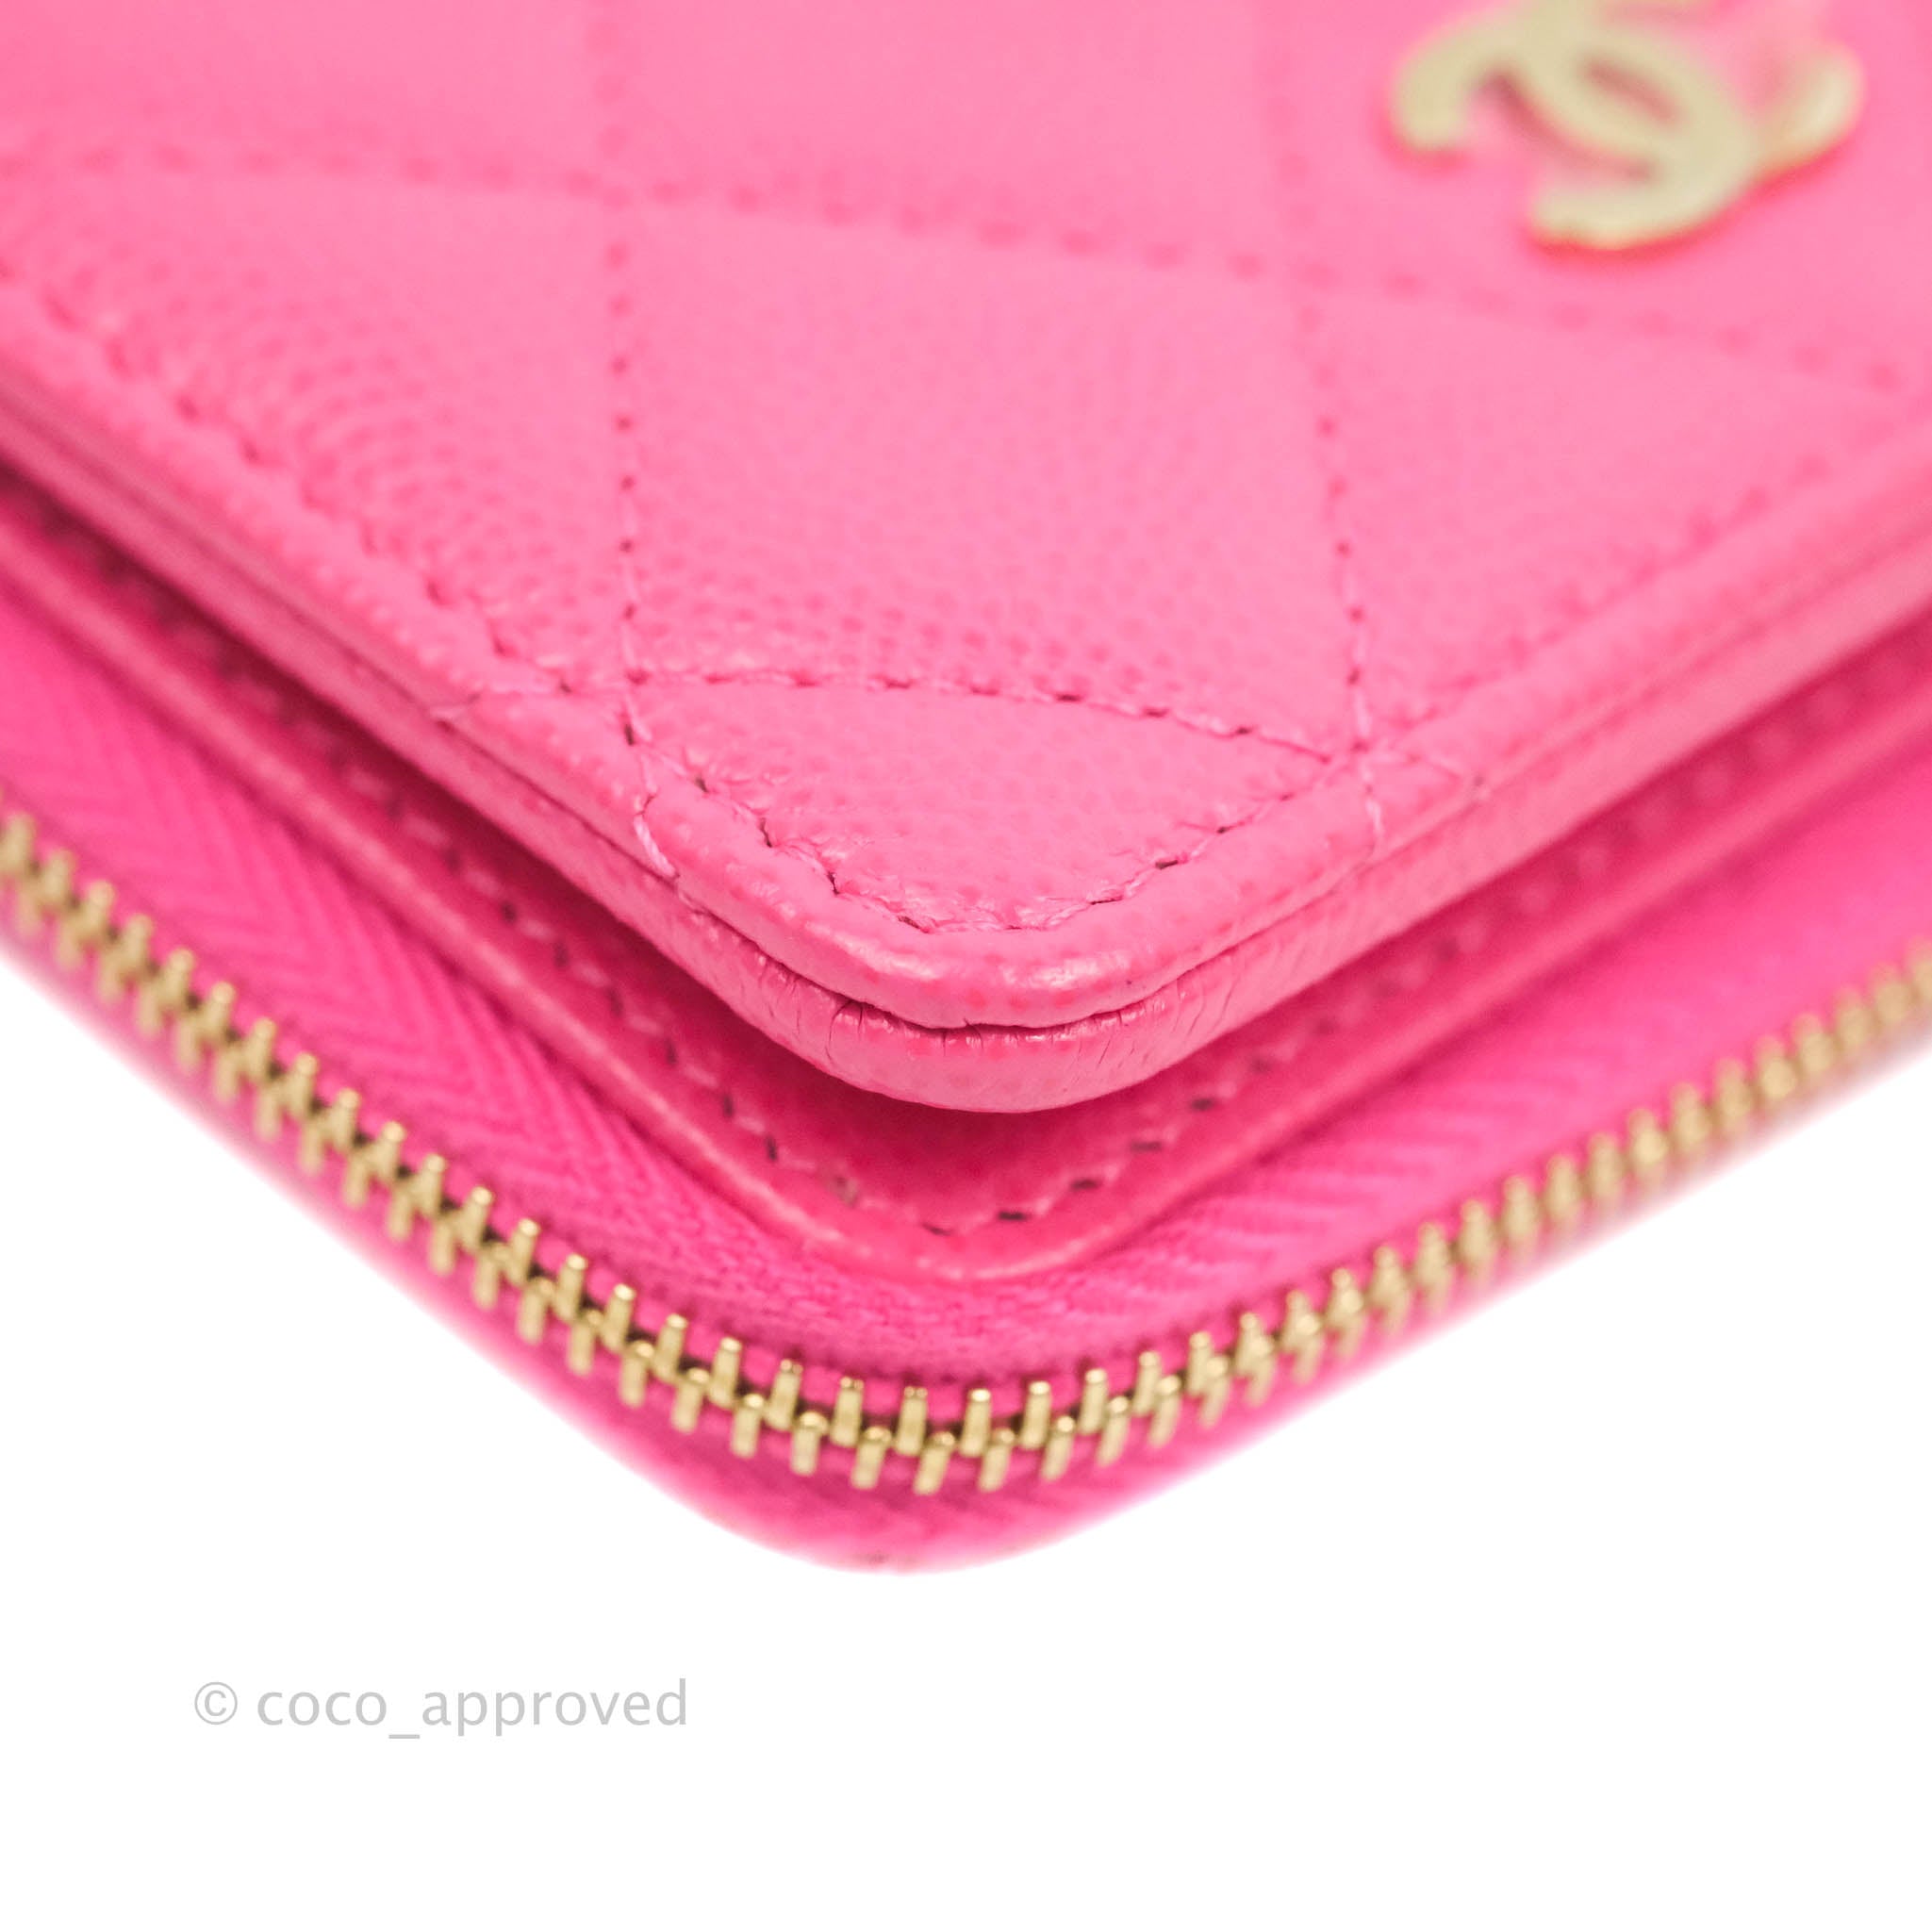 Chanel Classic Quilted Card Holder With Zip Coin Purse Pink Caviar